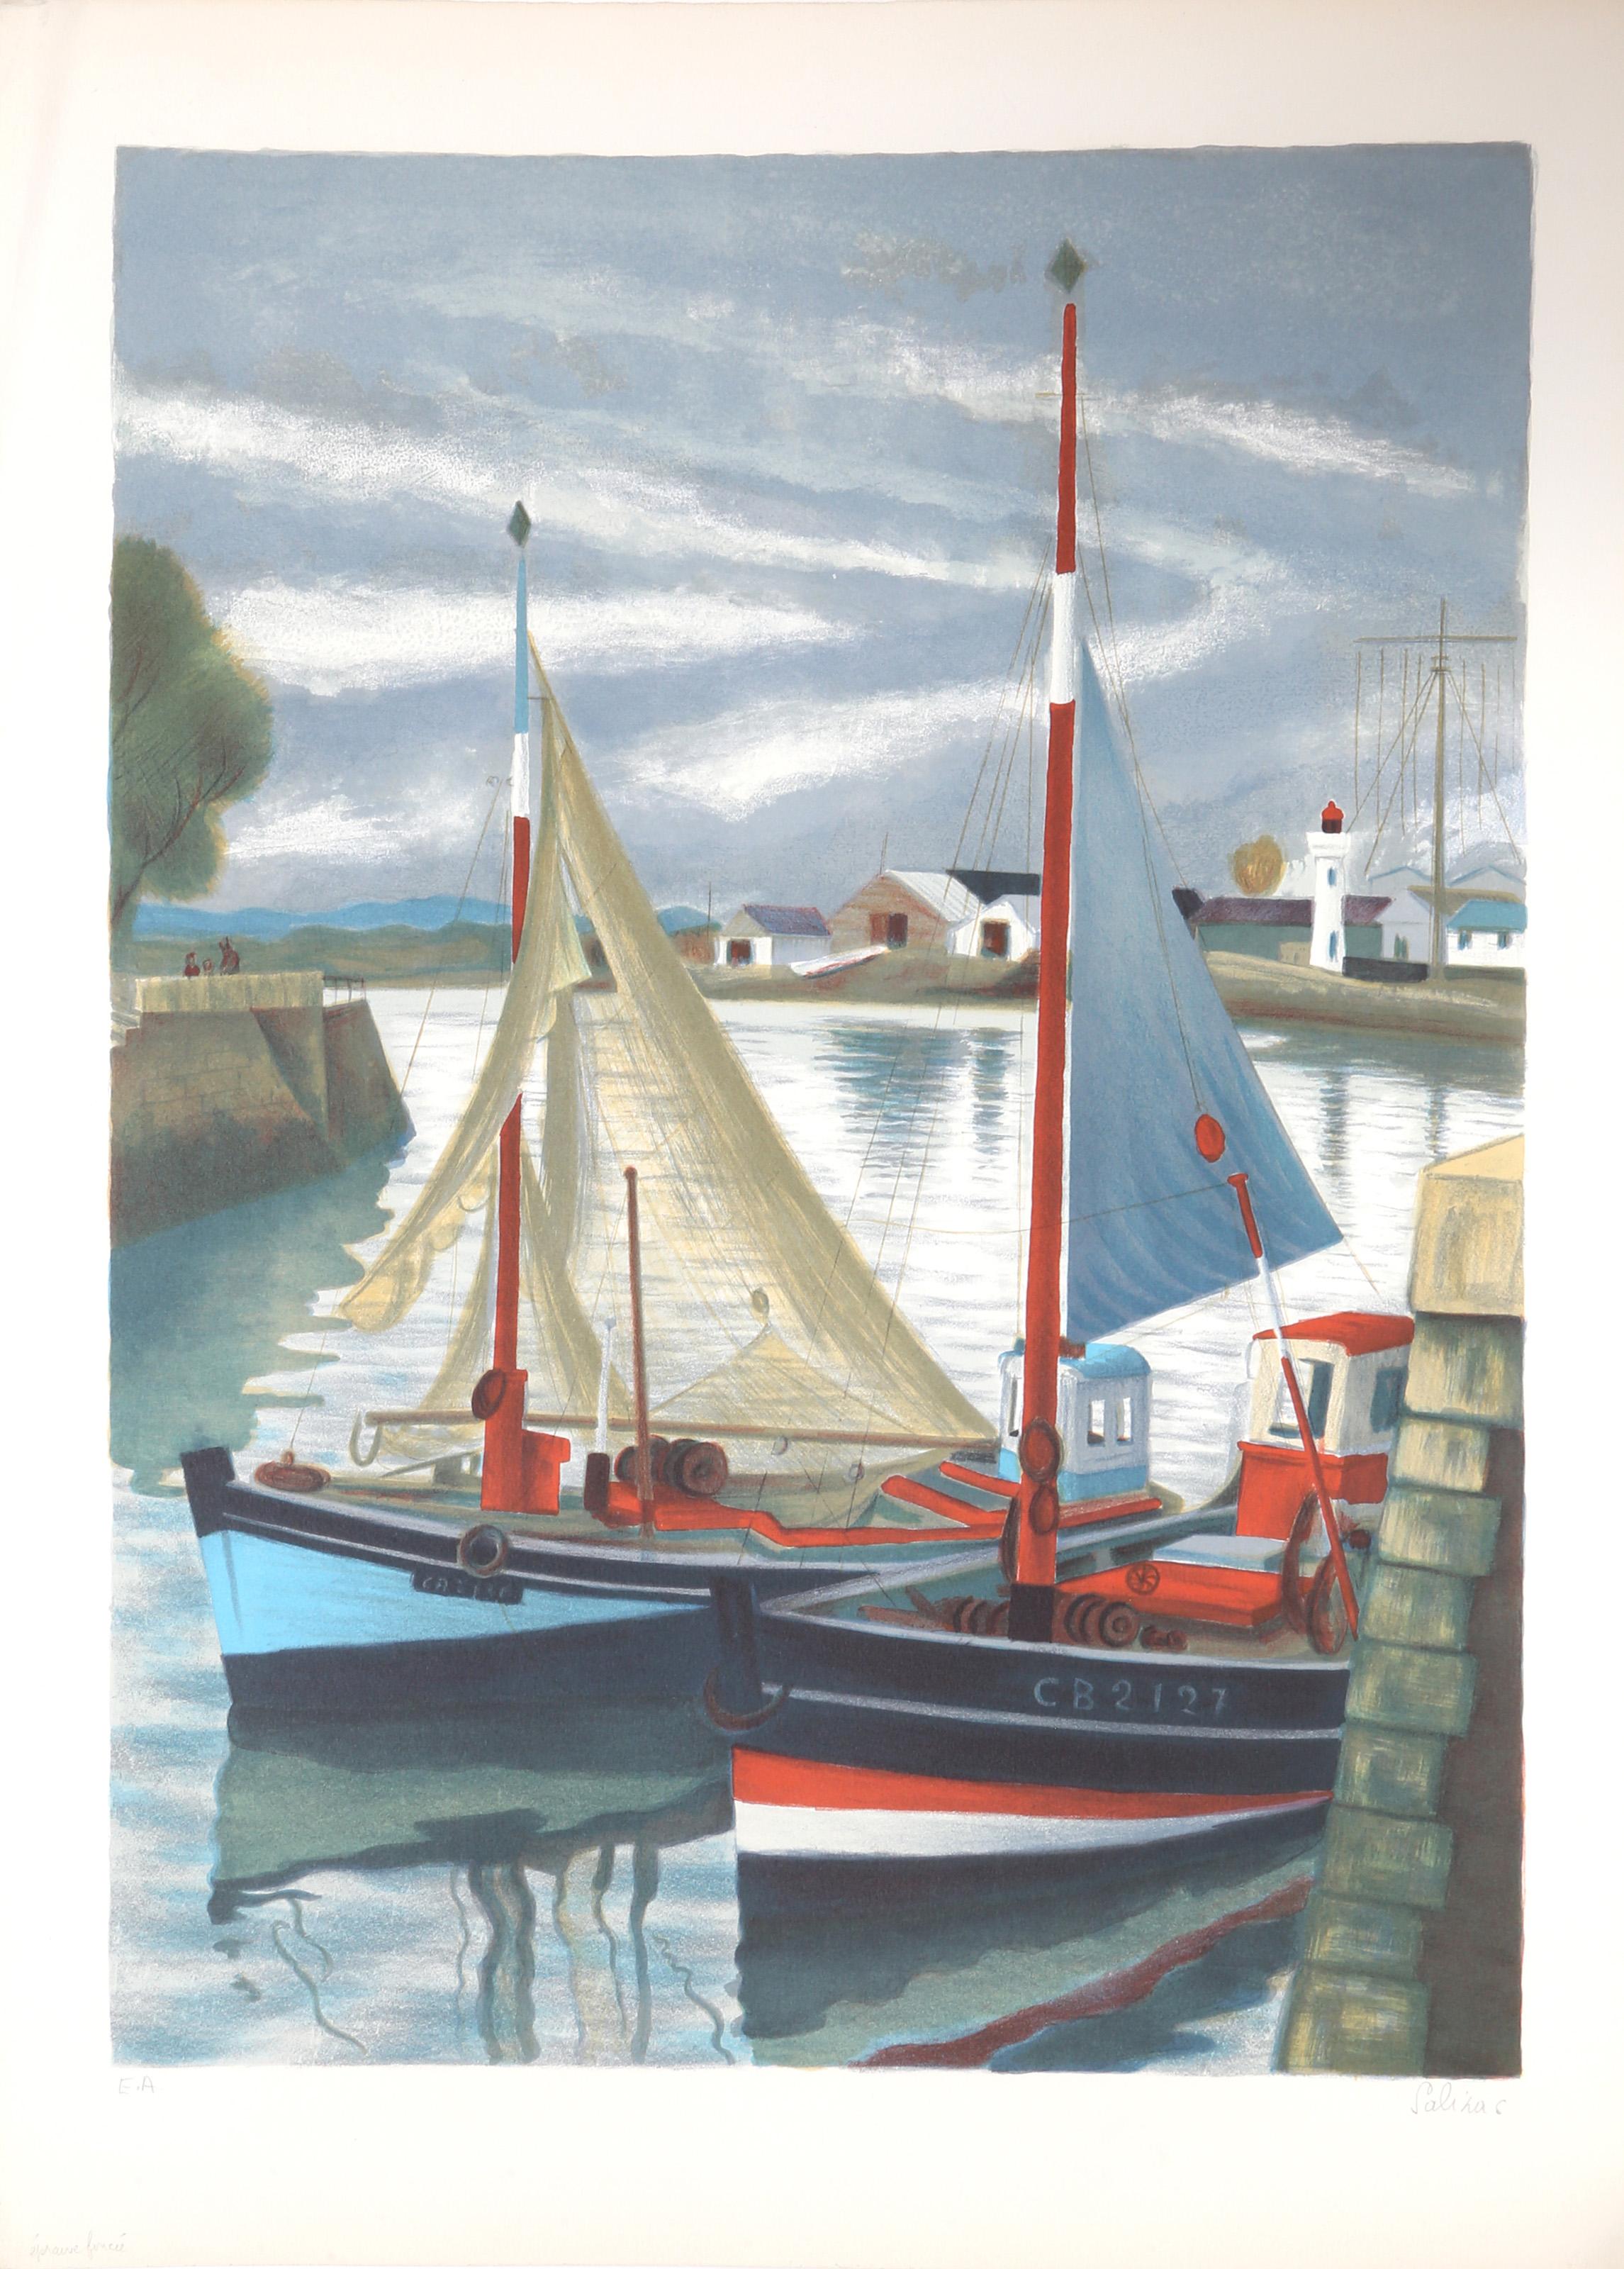 Laurent Marcel Salinas, Egyptian/French (1913 - 2010) -  Two Sailboats in Harbor. Year: circa 1985, Medium: Lithograph on Arches Paper, signed in pencil, Edition: EA, Image Size: 25 x 18.5 inches, Size: 30 x 21.5 in. (76.2 x 54.61 cm) 